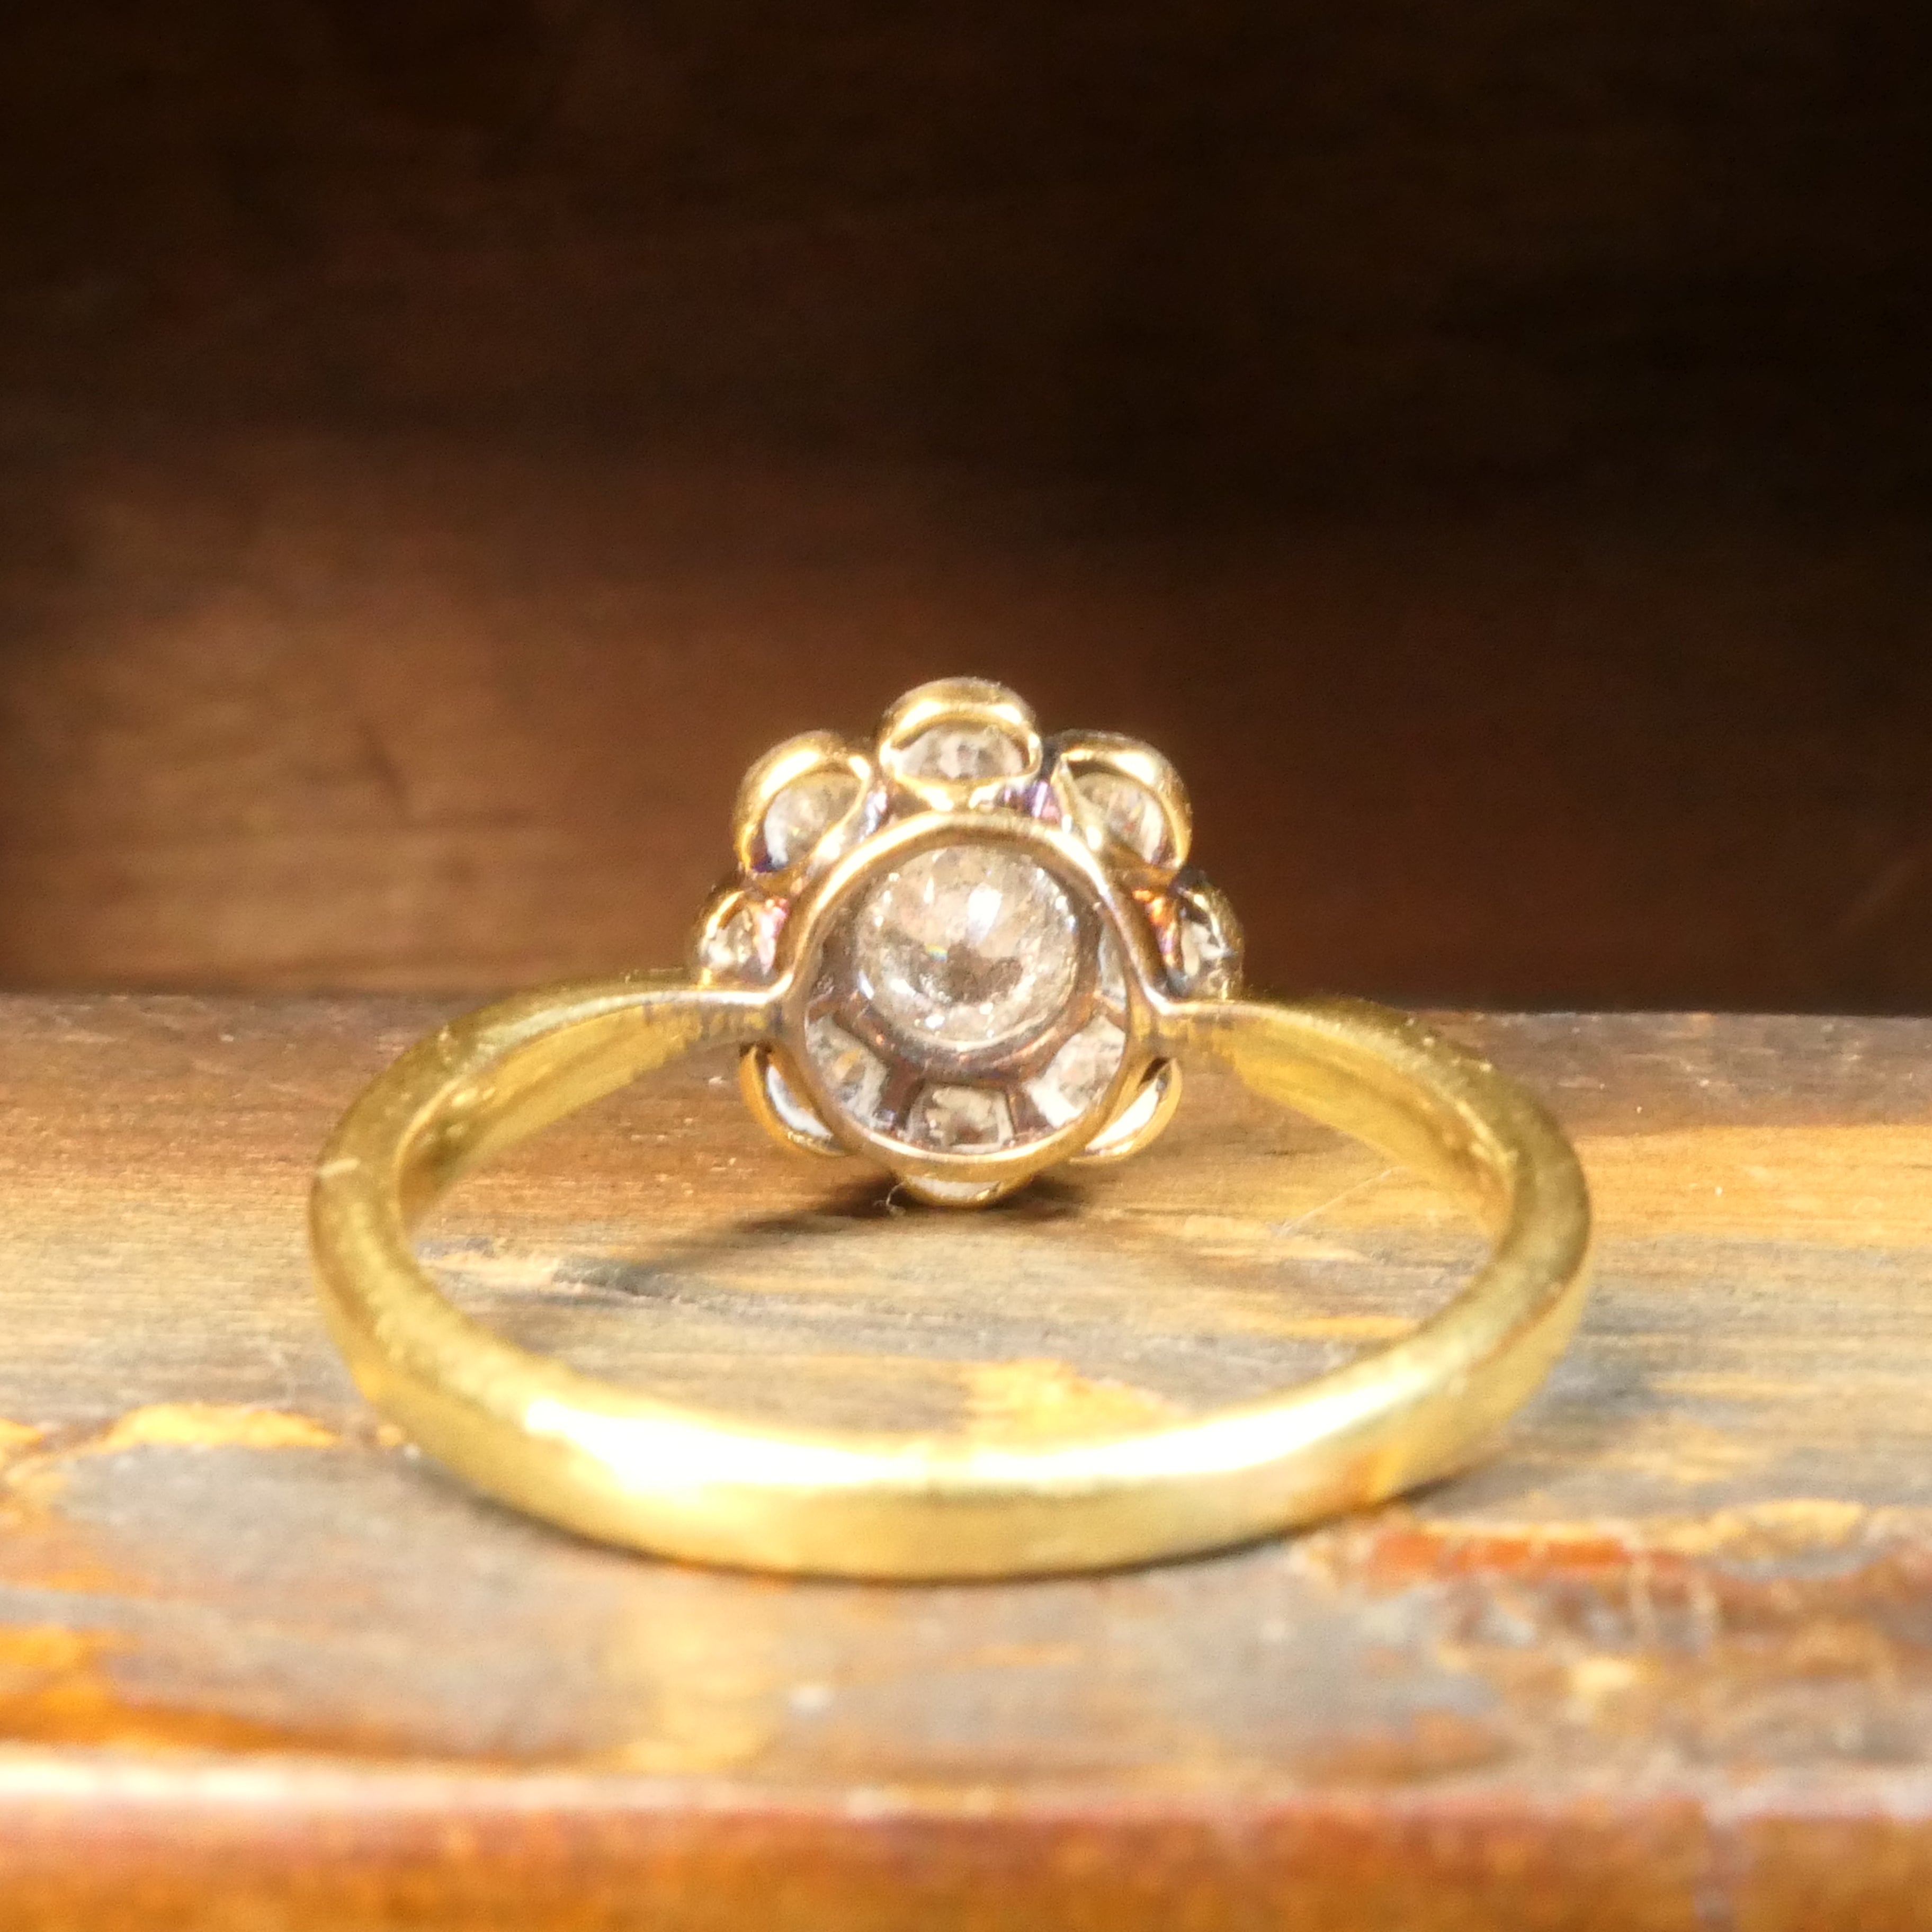 Antique, 18ct Gold, Diamond Daisy Cluster Ring